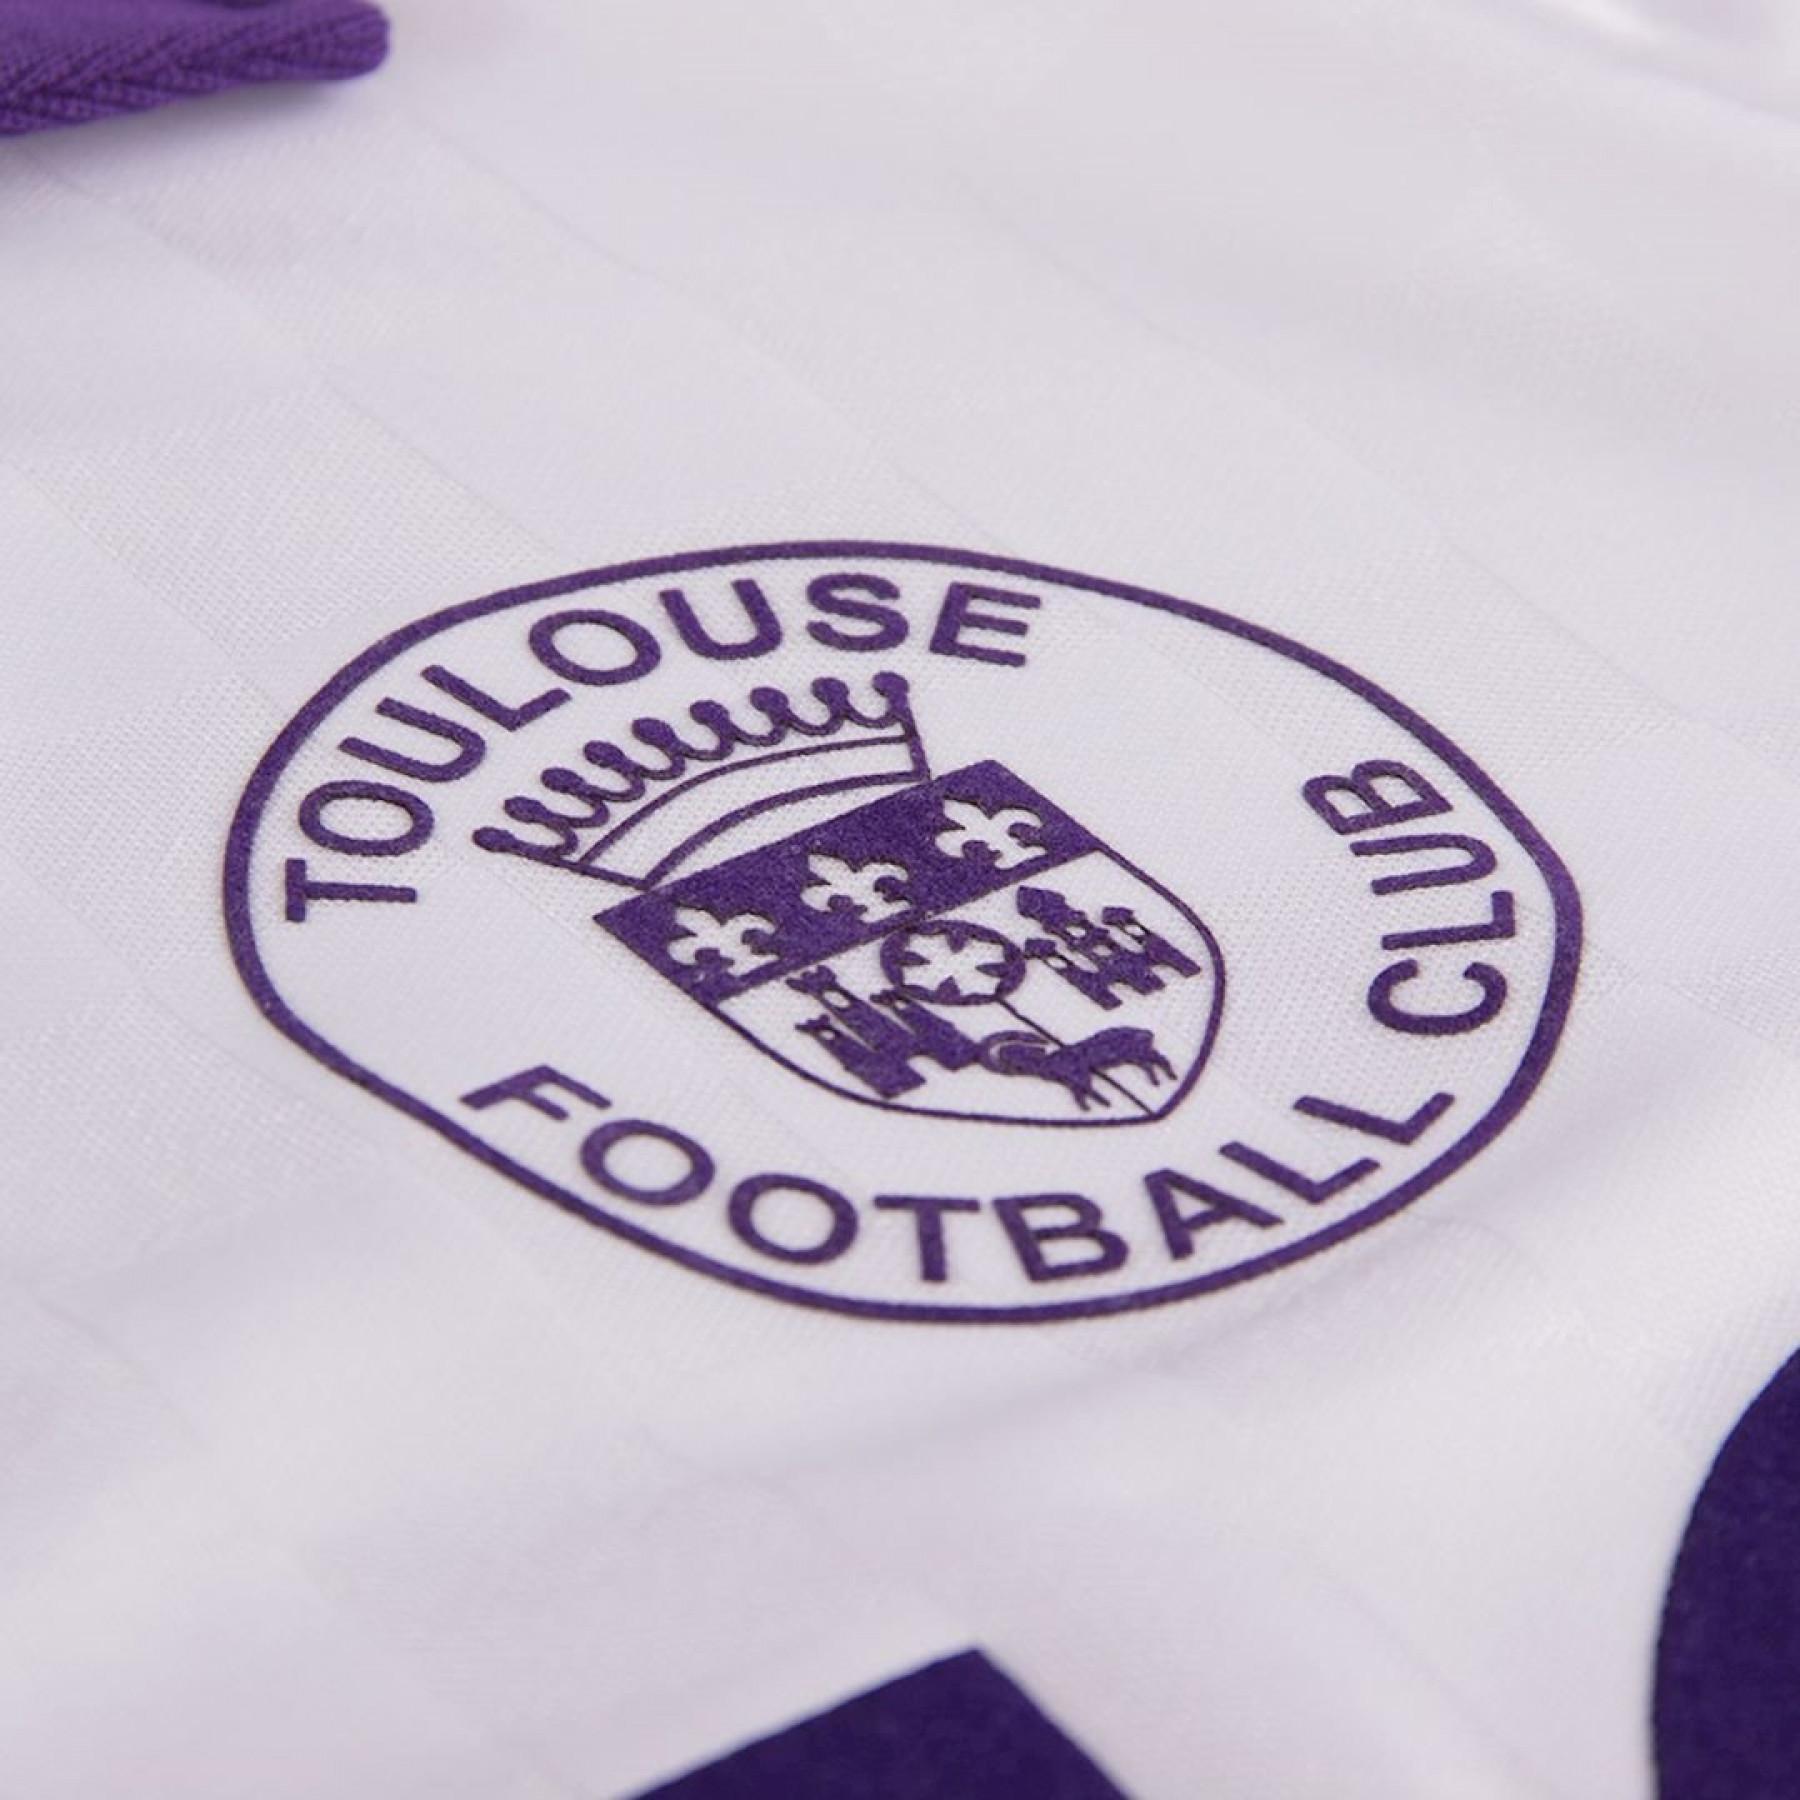 Maillot Copa Toulouse 1986/87 UEFA CUP